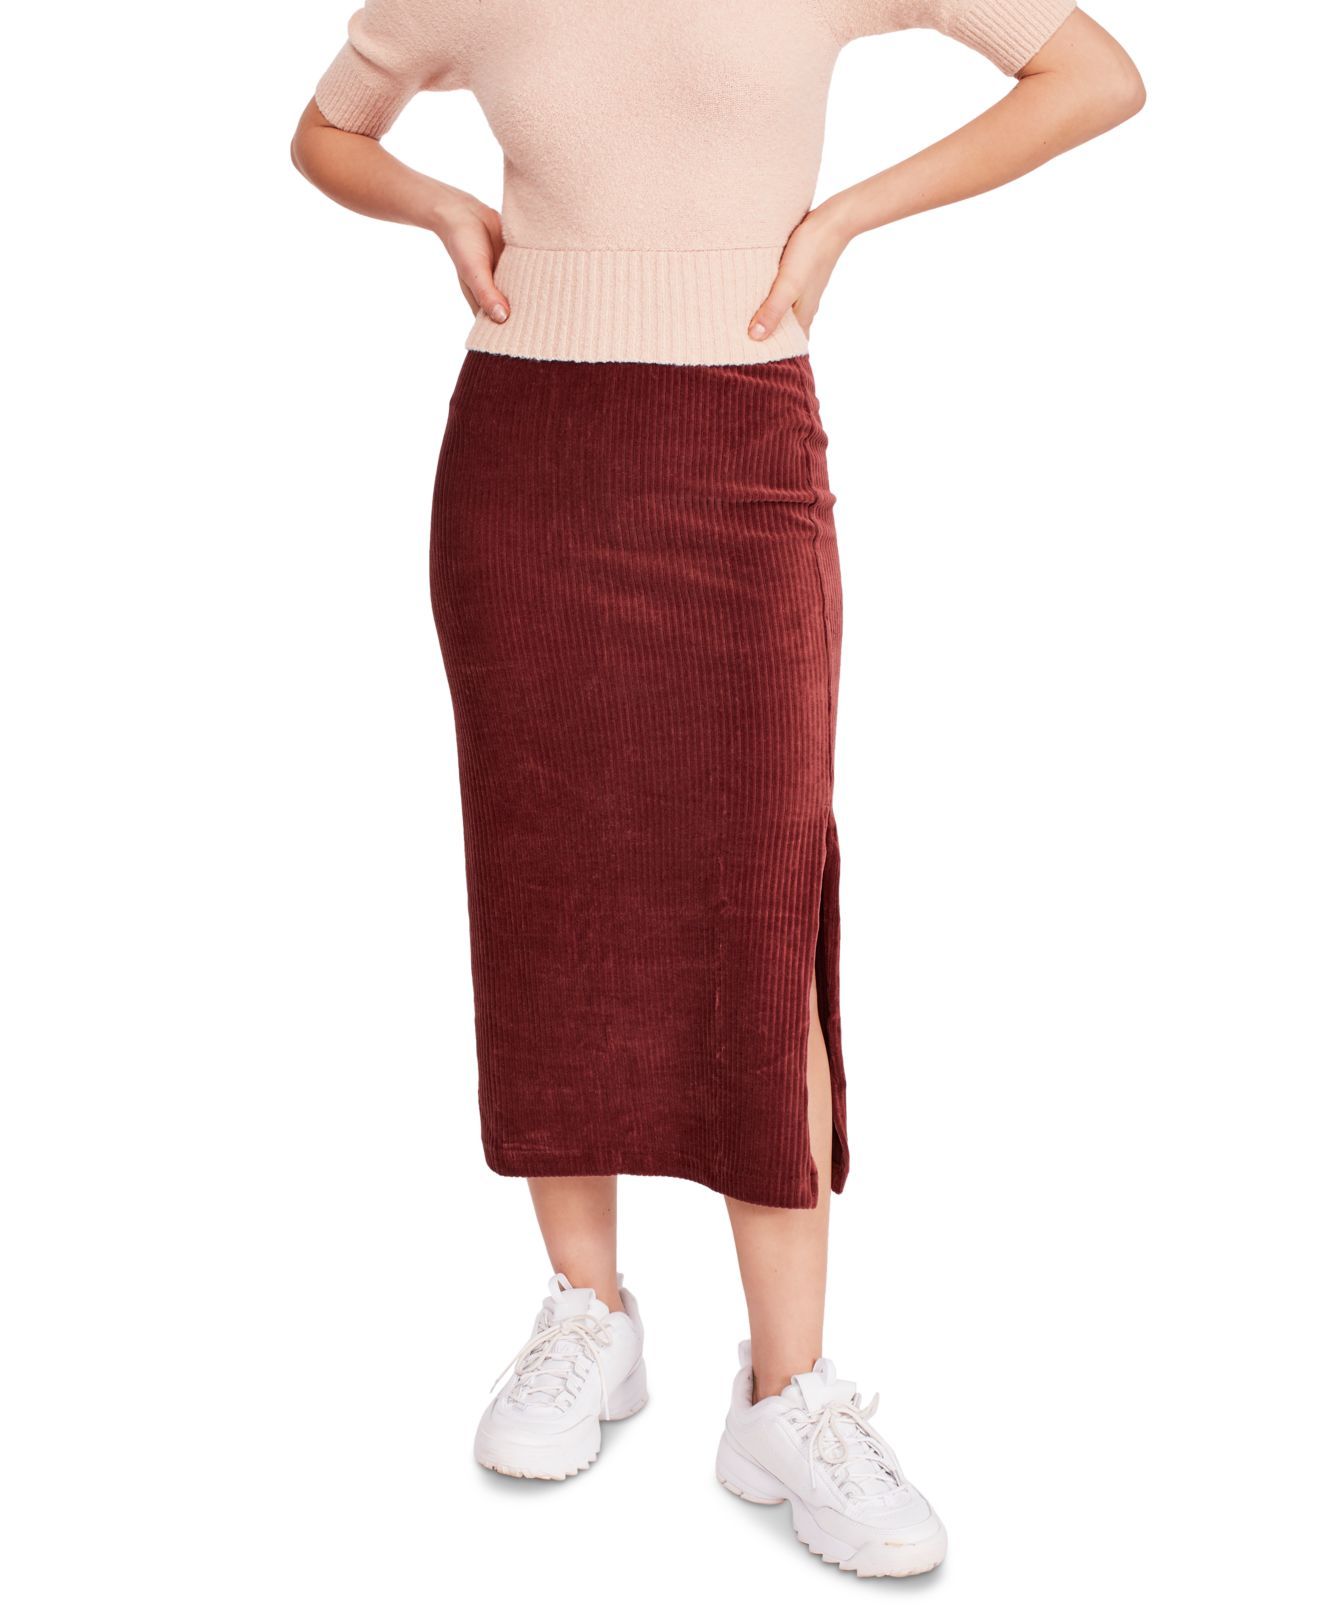 Color: Browns Size Type: Regular Bottoms Size (Women's): S Type: Skirt Style: Straight, Pencil Skirt Length: Midi Material: 100% Polyester Closure: Slip on